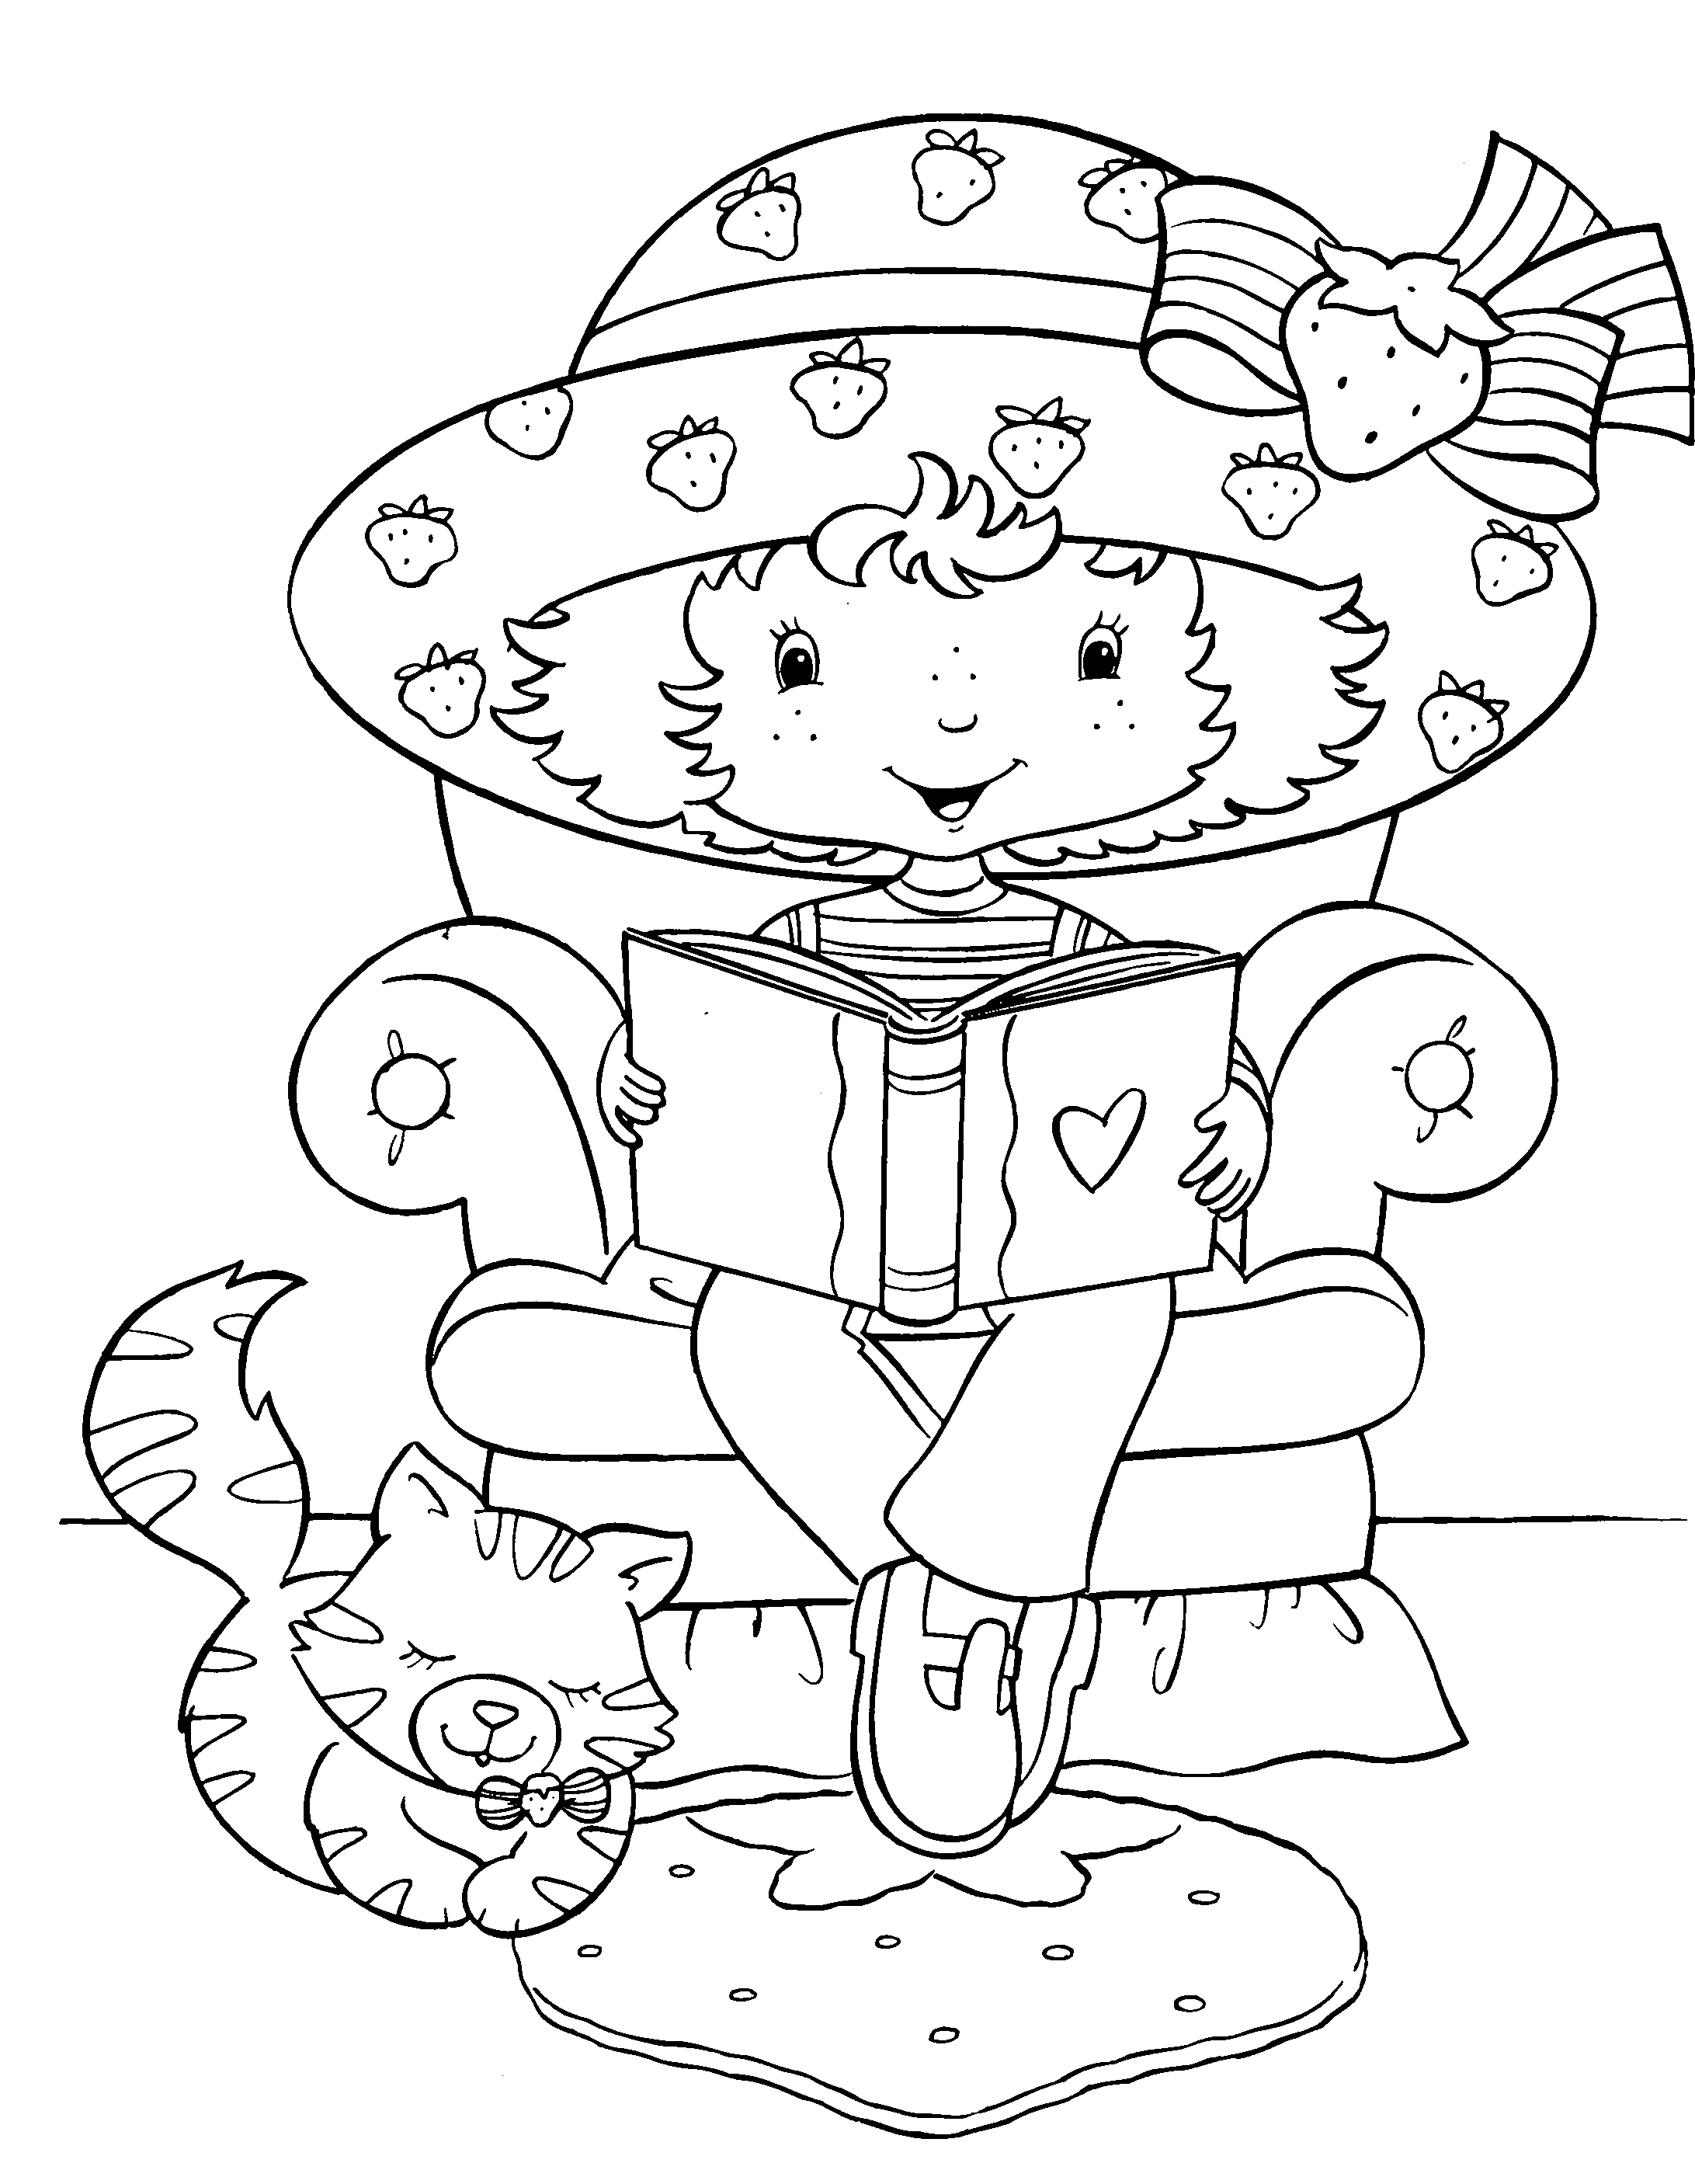 Drawing of Strawberry Shortcake to color